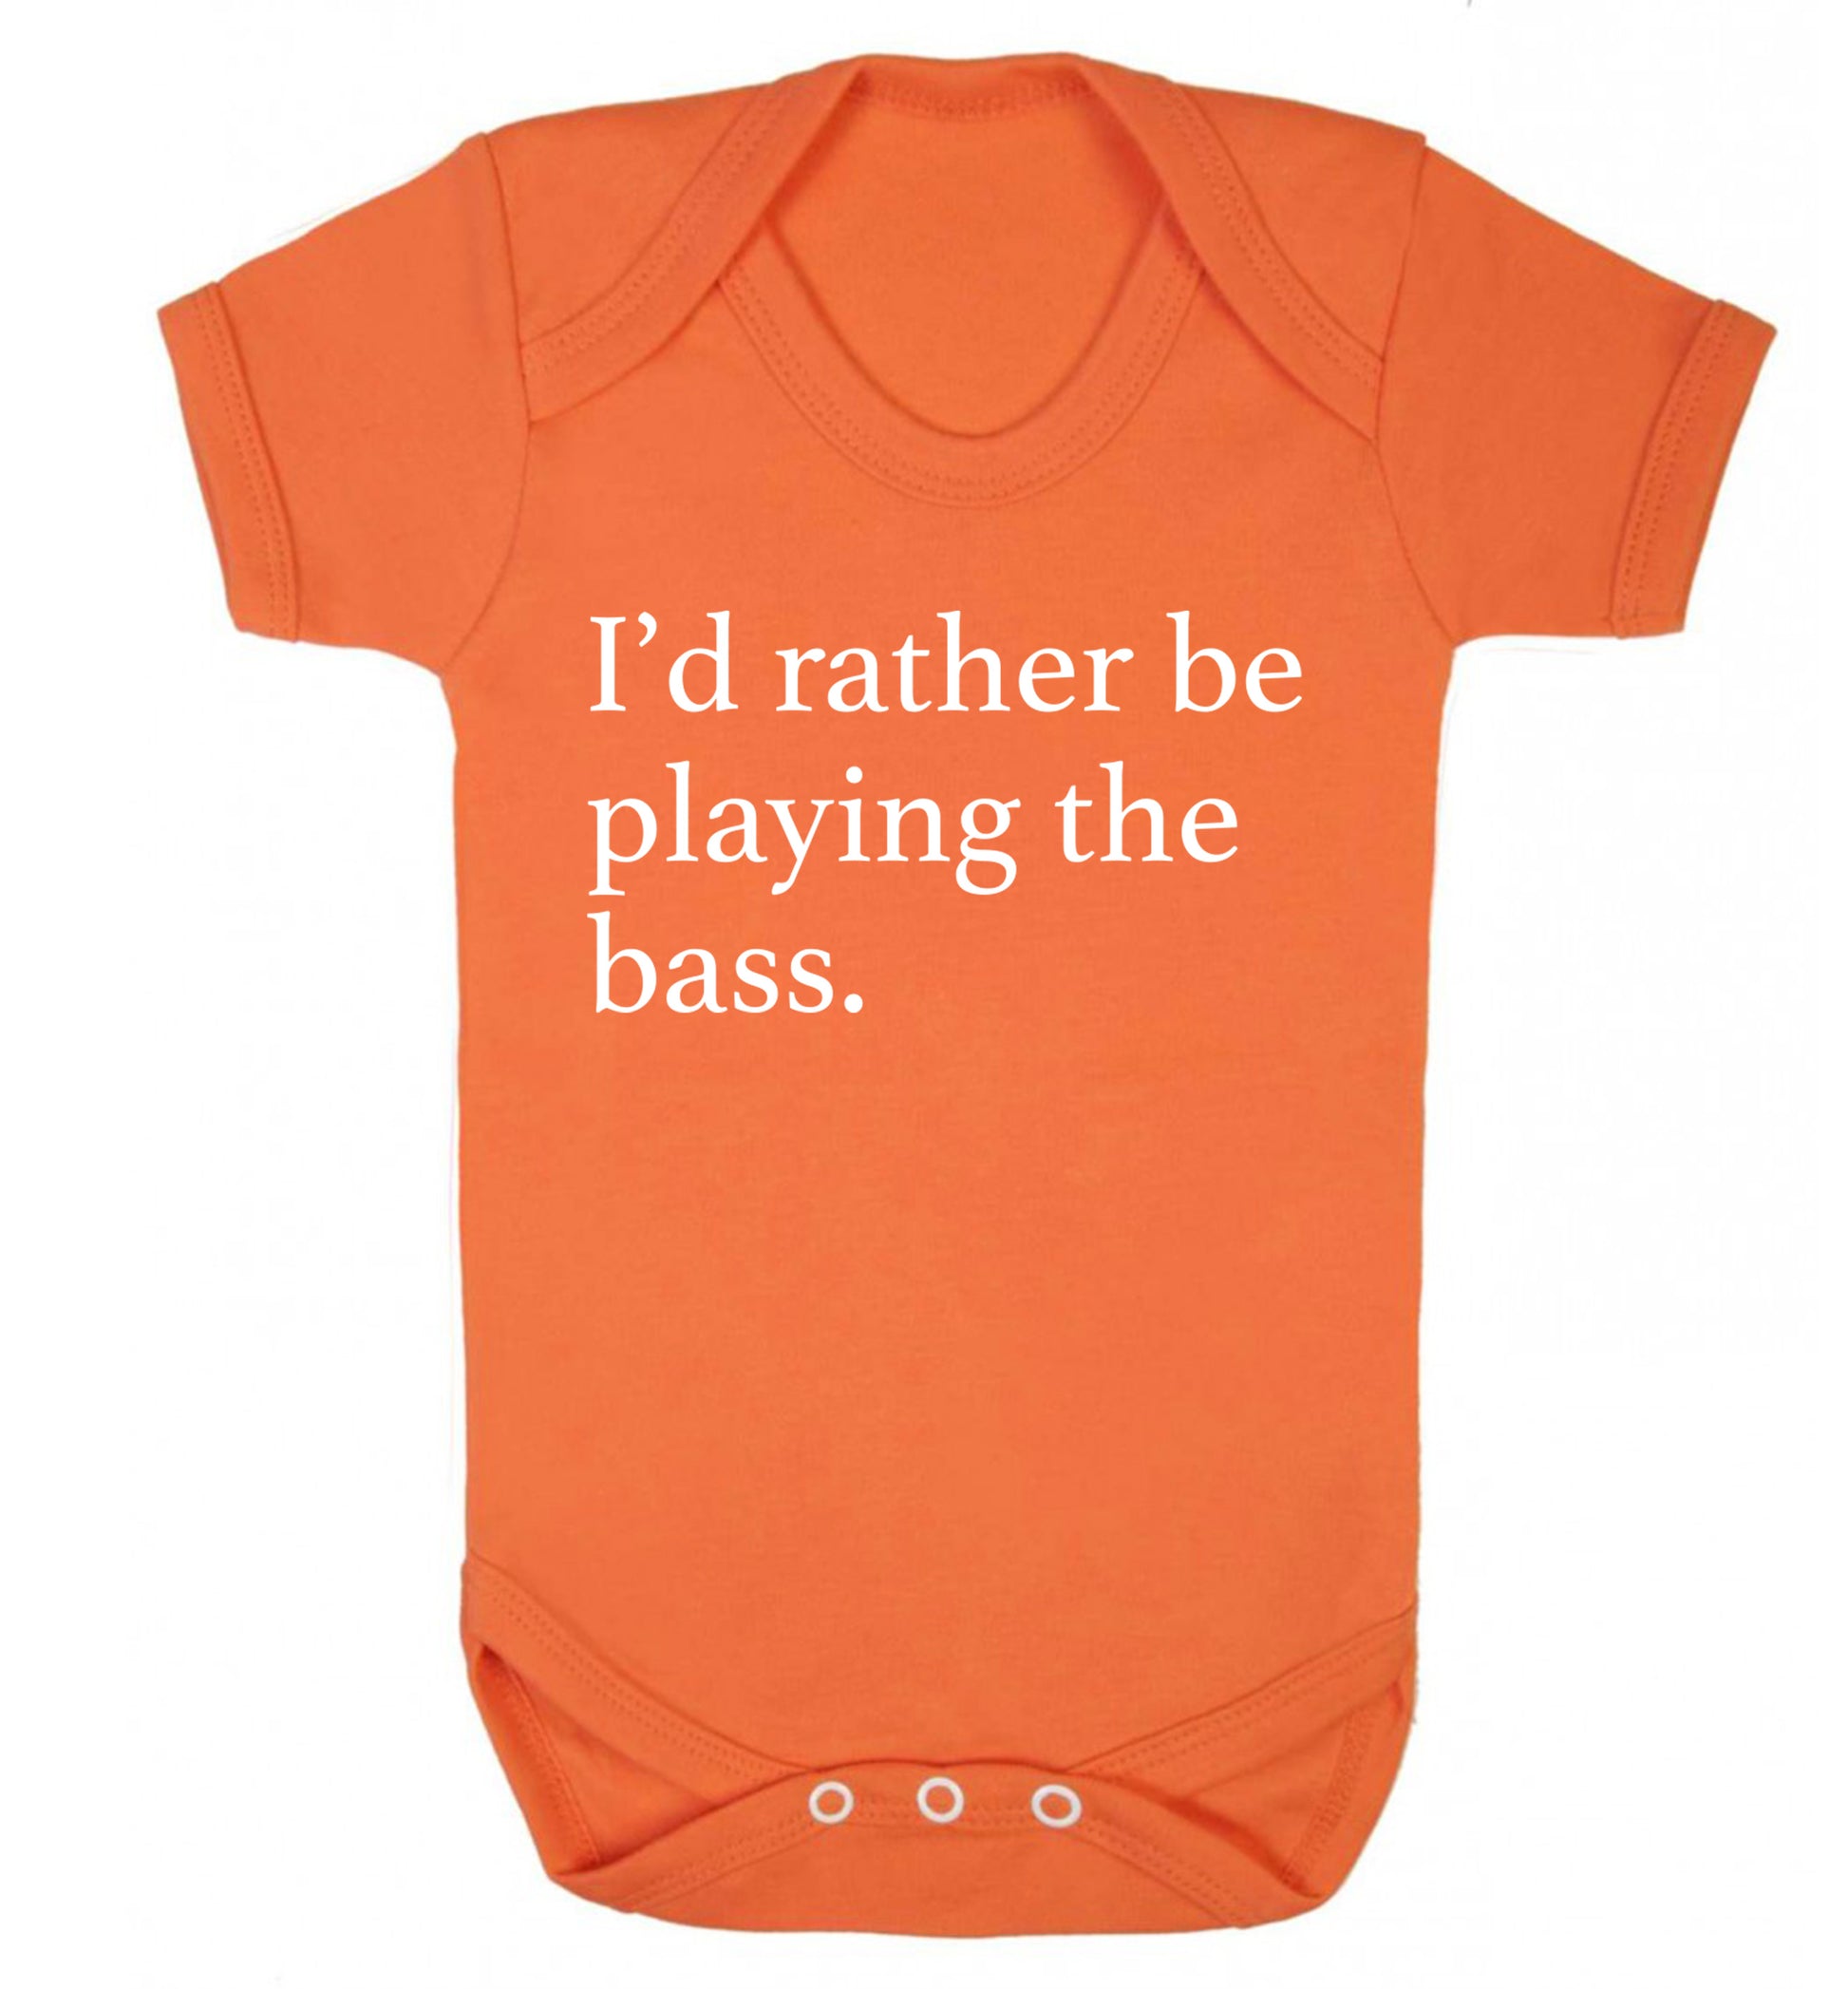 I'd rather by playing the bass Baby Vest orange 18-24 months